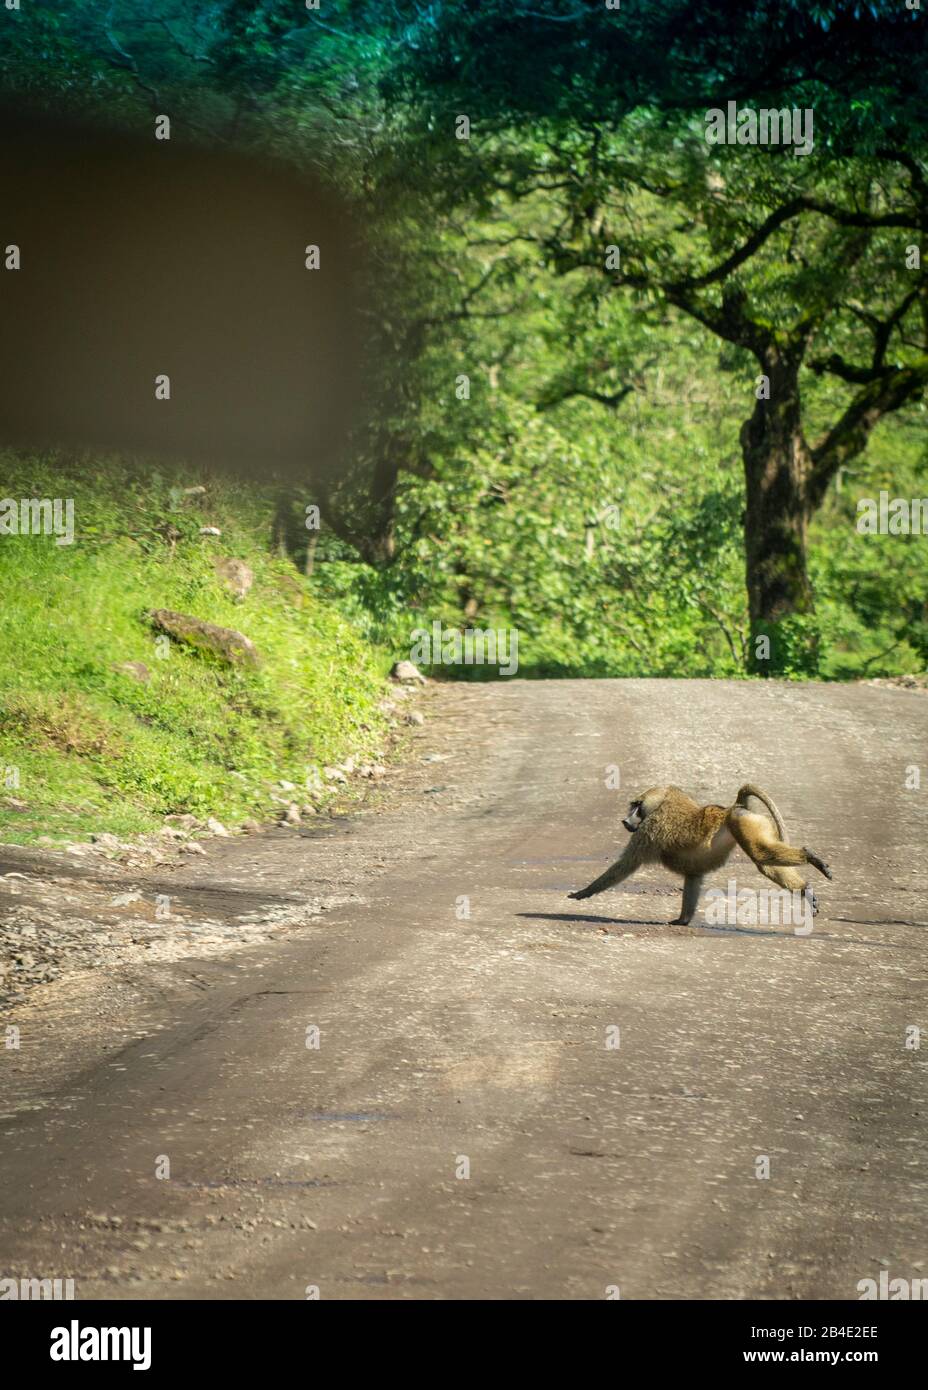 A foot, tent and jeep safari through northern Tanzania at the end of the rainy season in May. National Parks Serengeti, Ngorongoro Crater, Tarangire, Arusha and Lake Manyara. Baboon crosses a road through the African bush, photographed through the front window of a jeep. Stock Photo